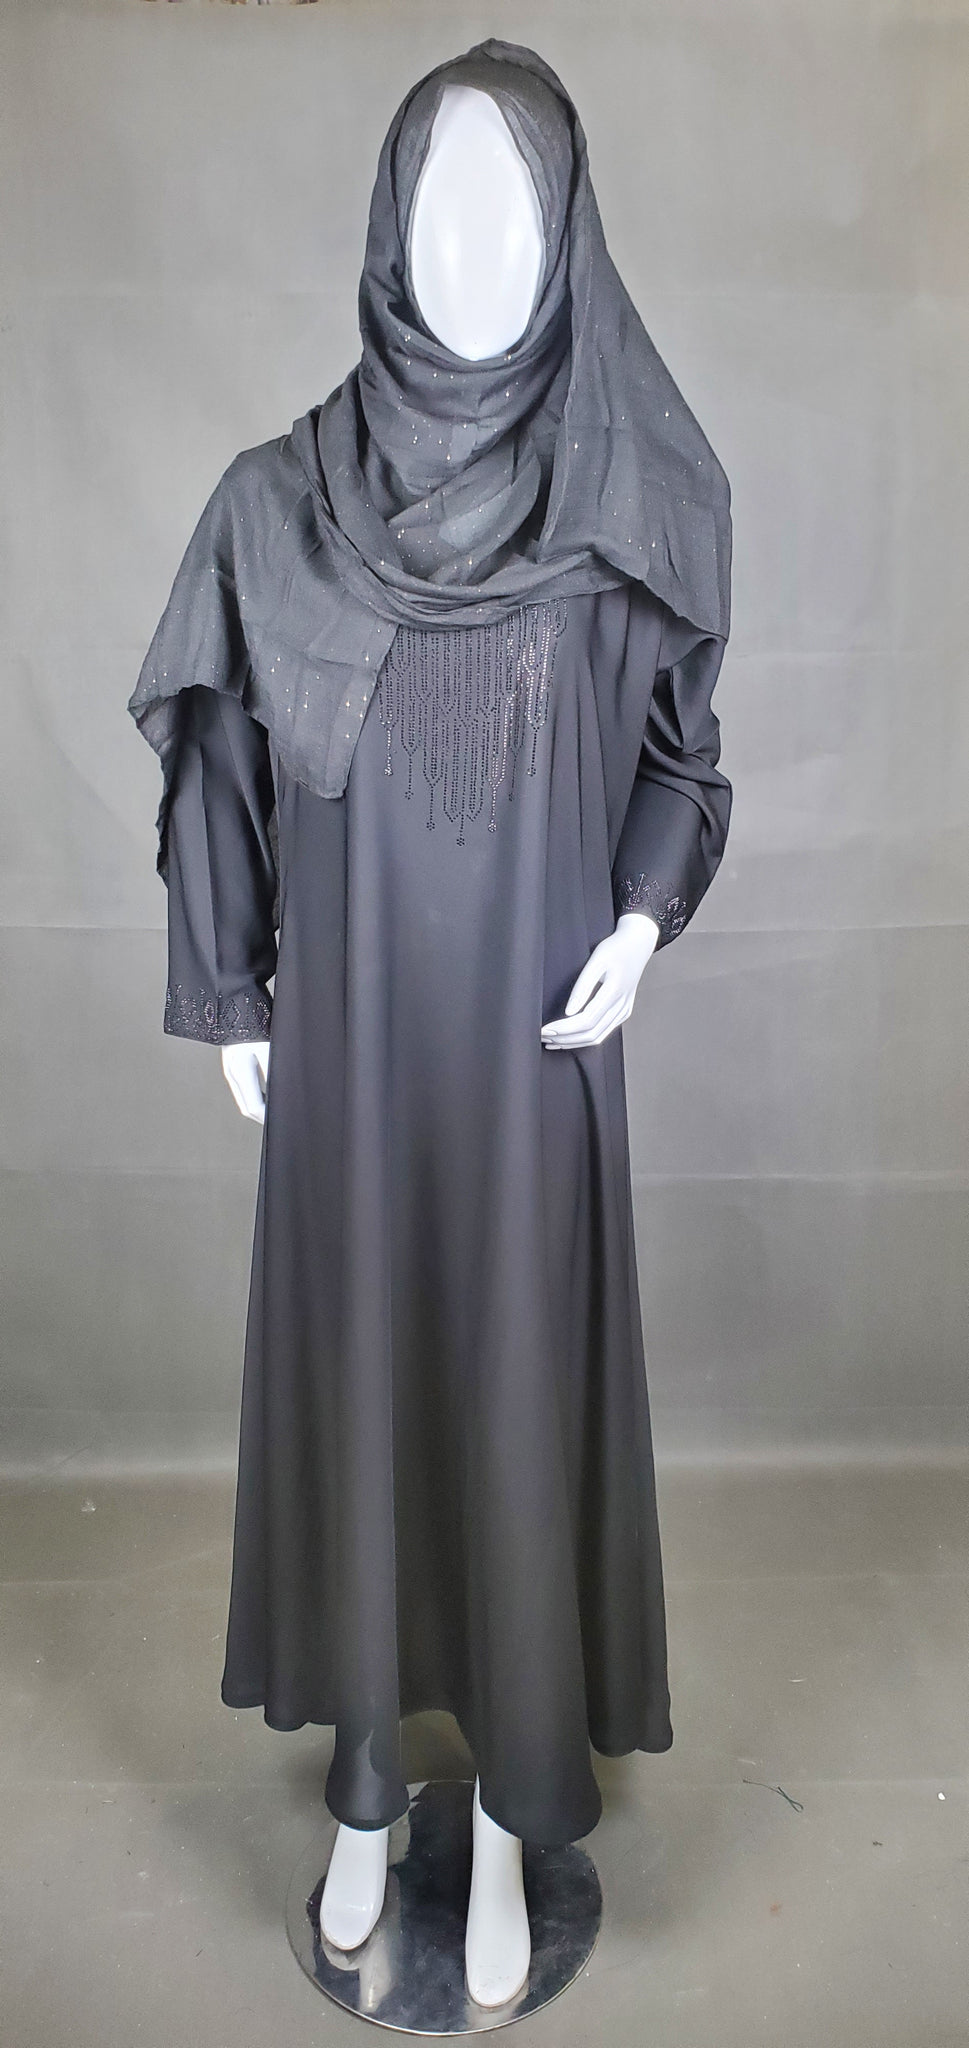 Modest Wear - Embroided Traditional Abaya - Black